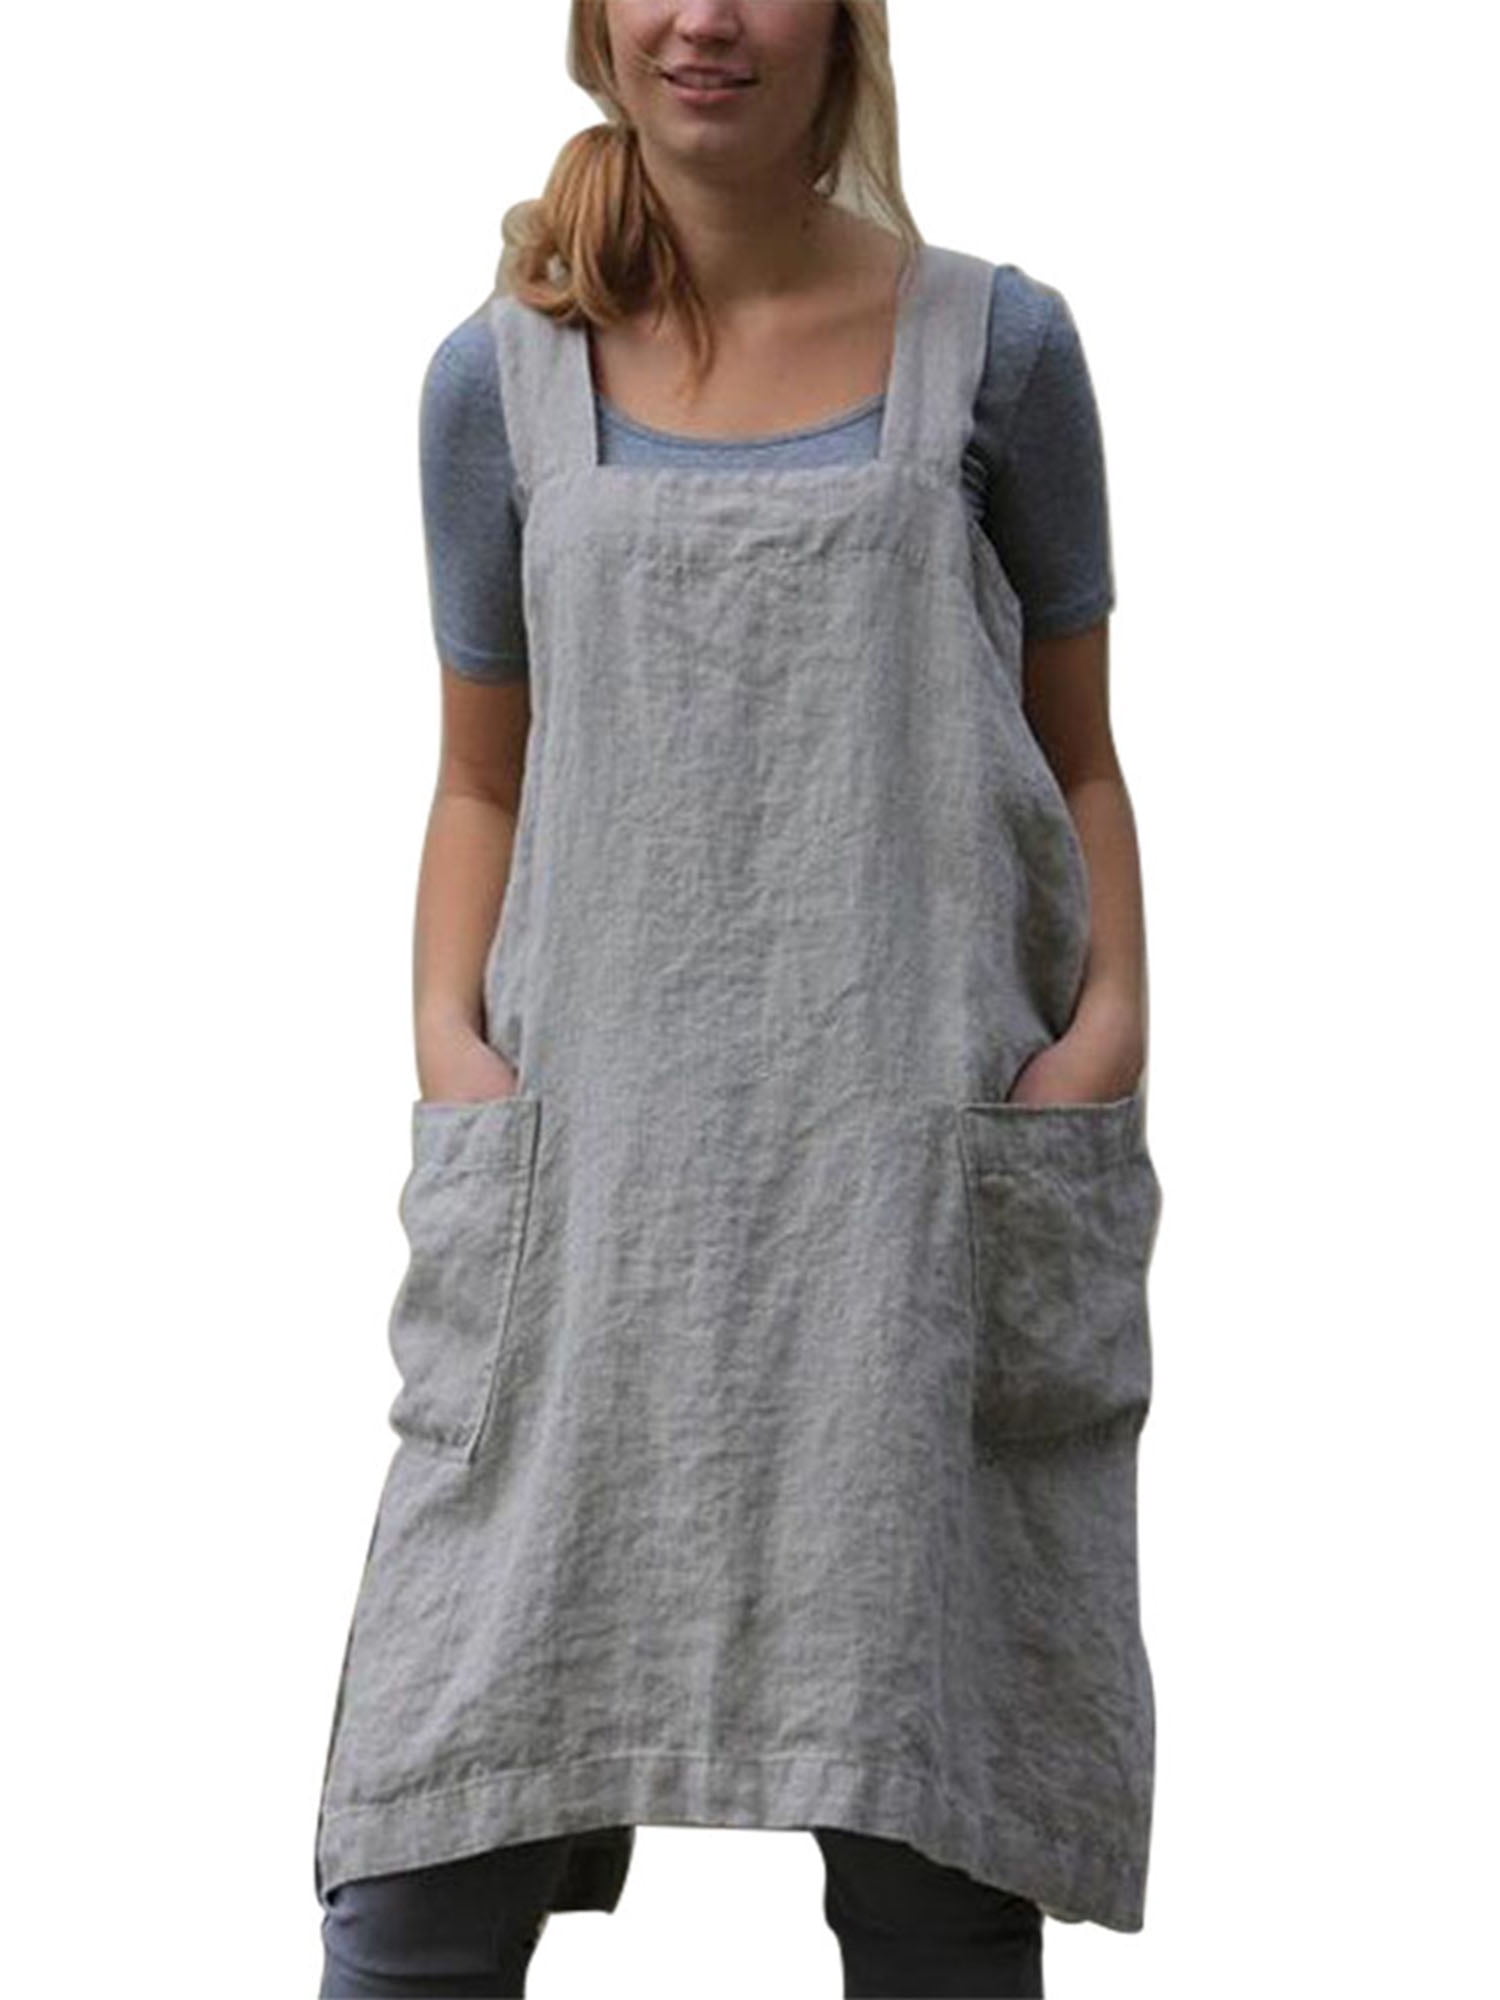 Women’s Pinafore Square Apron Baking Cooking Gardening Works Cross Back Cotton/Linen Blend Dress with 2 Pockets